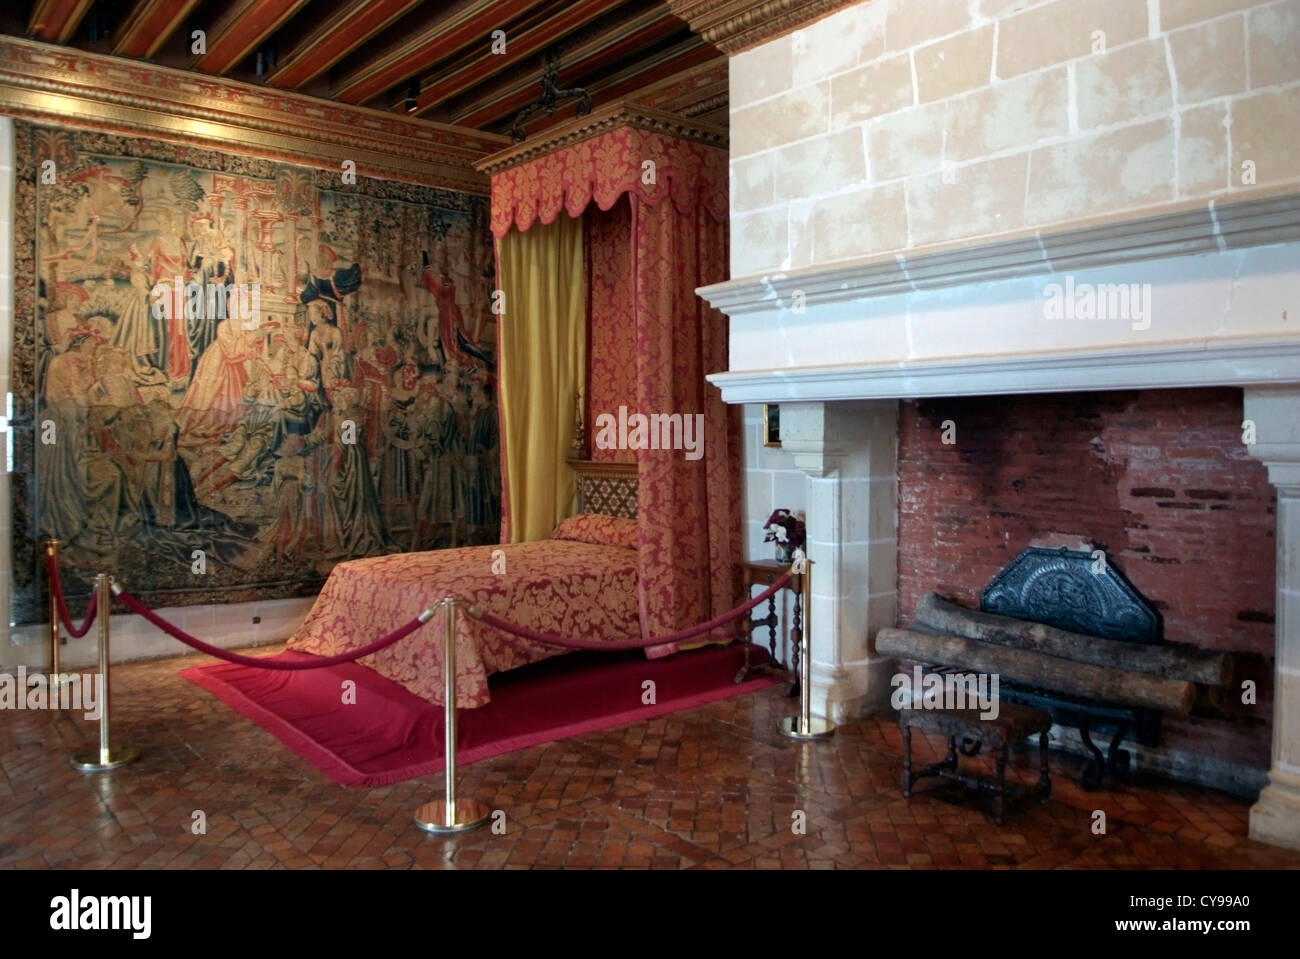 FRANCE Château de Chenonceau is a manor house near the small village of Chenonceaux, Loire Valley. Five queens' bedroom. Stock Photo